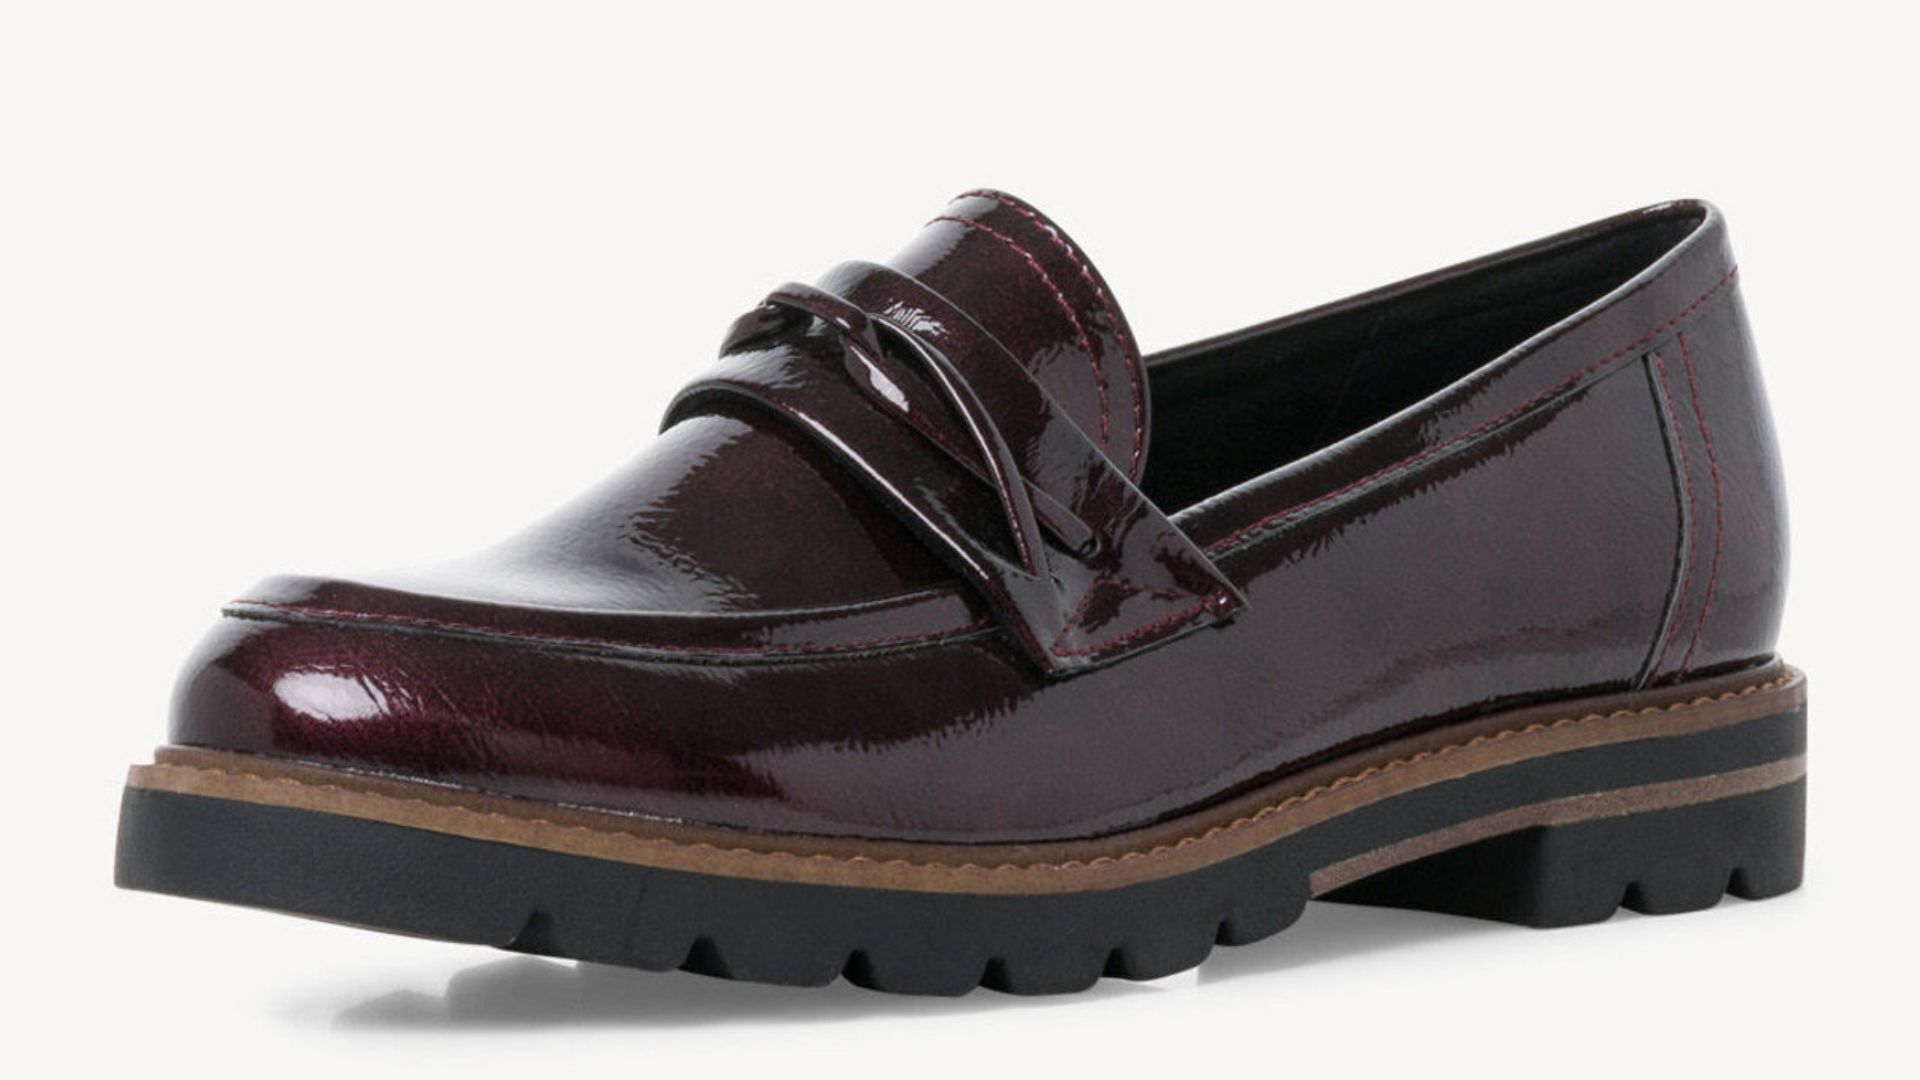 Waterproof loafers for the office